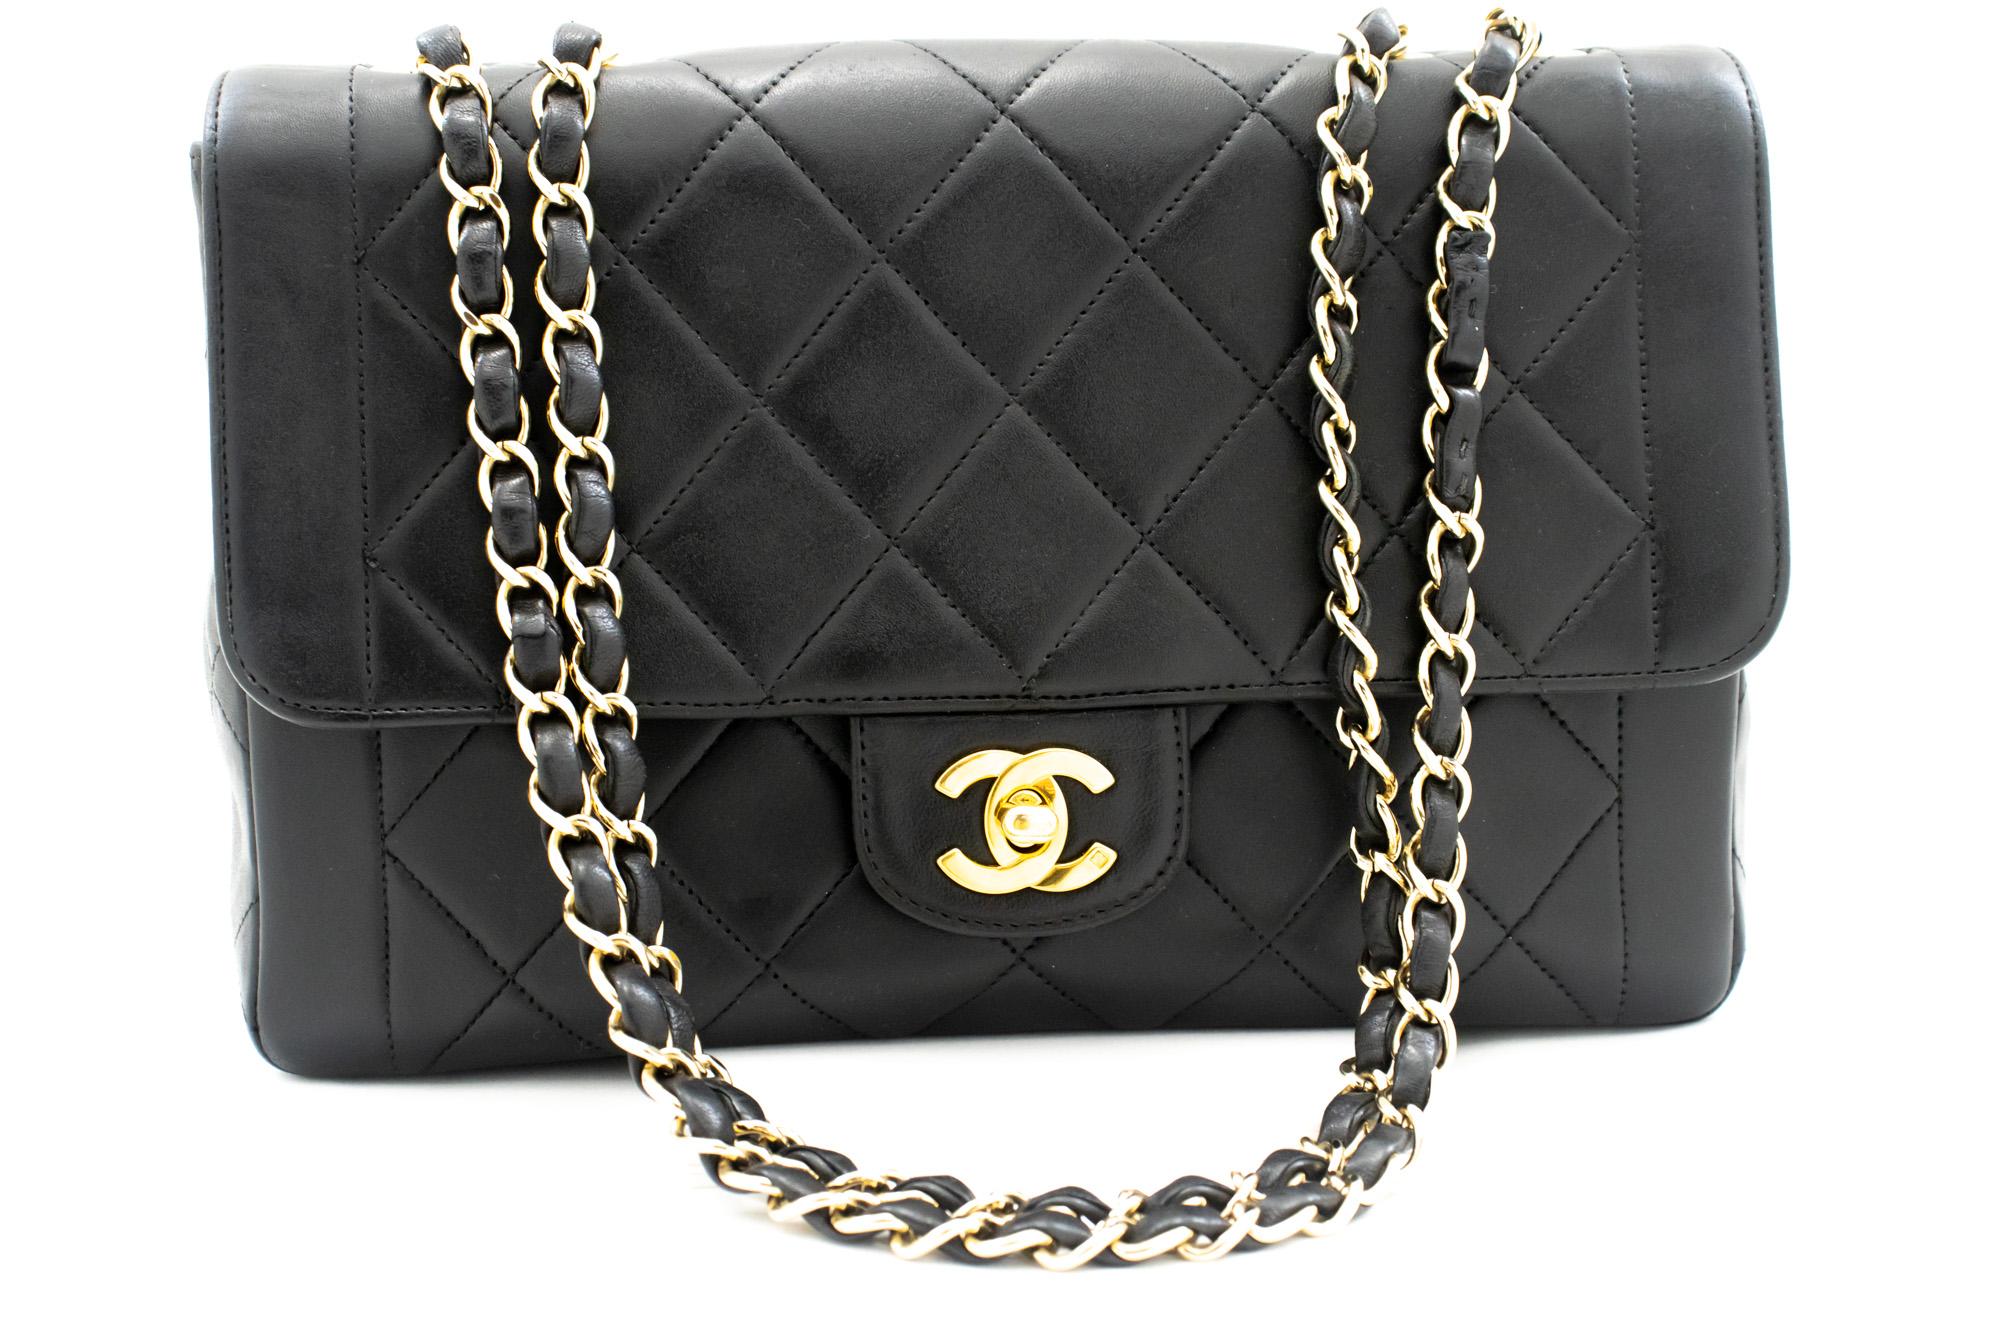 An authentic CHANEL Vintage Single Flap Chain Shoulder Bag Black Quilted Lamb. The color is Black. The outside material is Leather. The pattern is Solid. This item is Vintage / Classic. The year of manufacture would be 1994-1996.
Conditions &